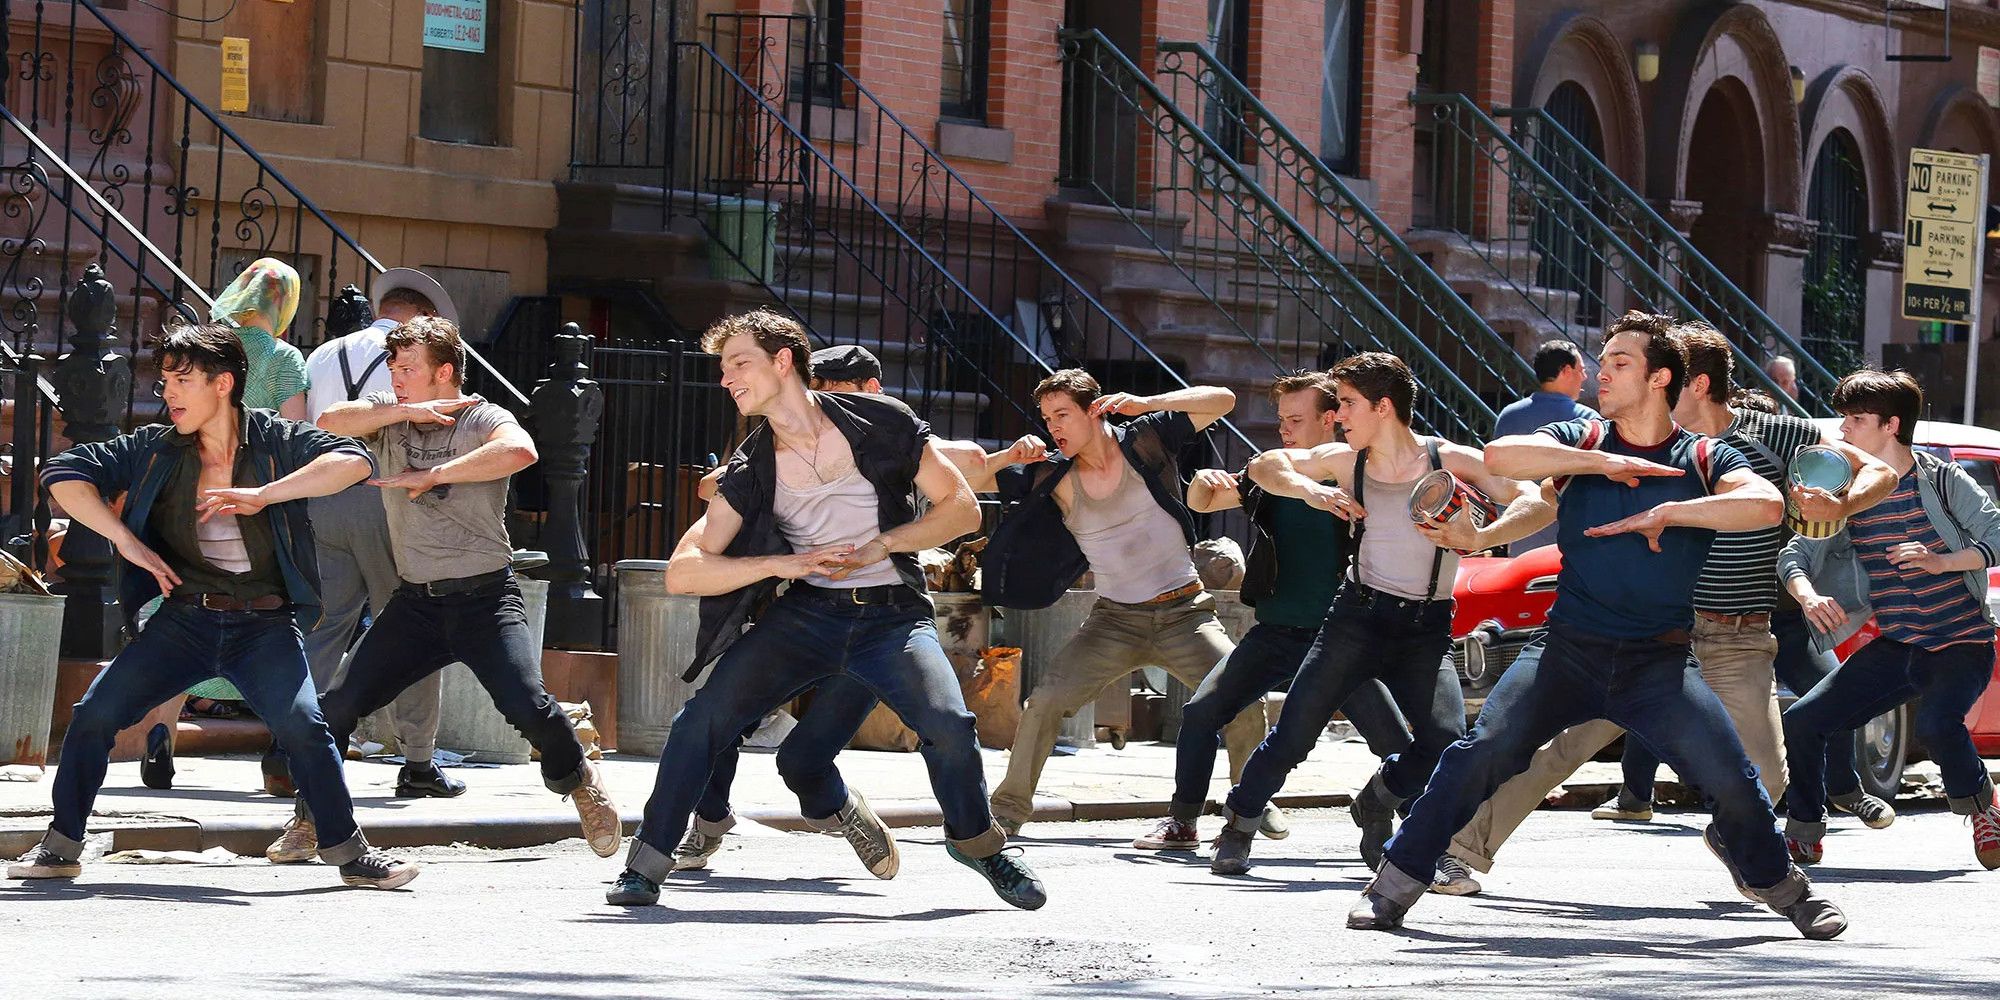 The Jets dance on their self-proclaimed turf in 2021's 'West Side Story' remake